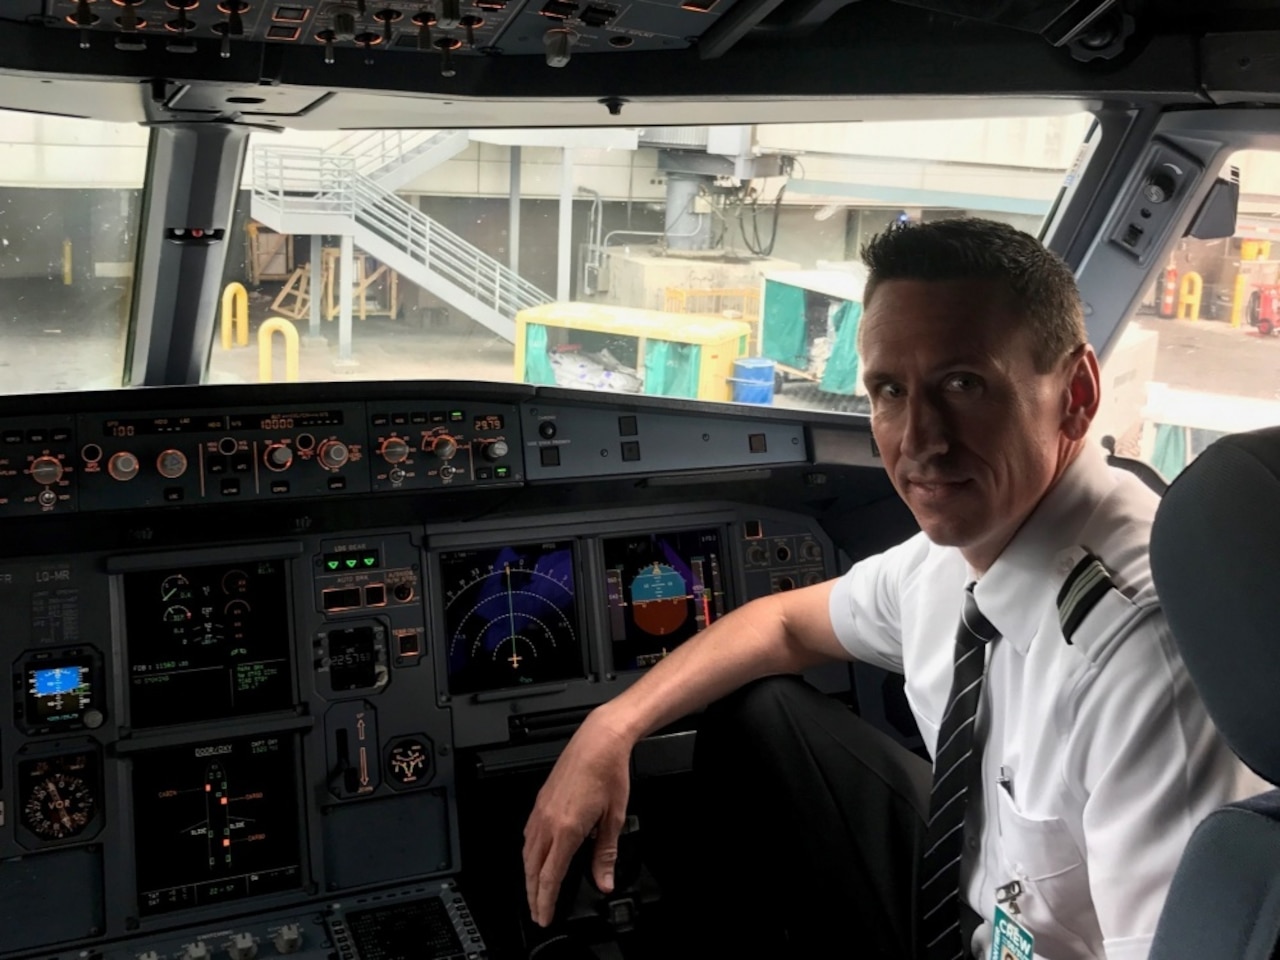 Airline pilot Ryan Scofield, pictured here in his cockpit, April 28, 2017, has flown for a commercial airline carrier for 12 years. When he's not in an Airbus A320, he’s piloting a C-130H Hercules aircraft for the Wyoming Air National Guard's 187th Airlift Squadron based in Cheyenne. Air Force Lt. Col. Scofield is also a Modular Airborne Fire Fighting System instructor pilot for the unit. Air Force photo by Master Sgt. Daniel Butterfield